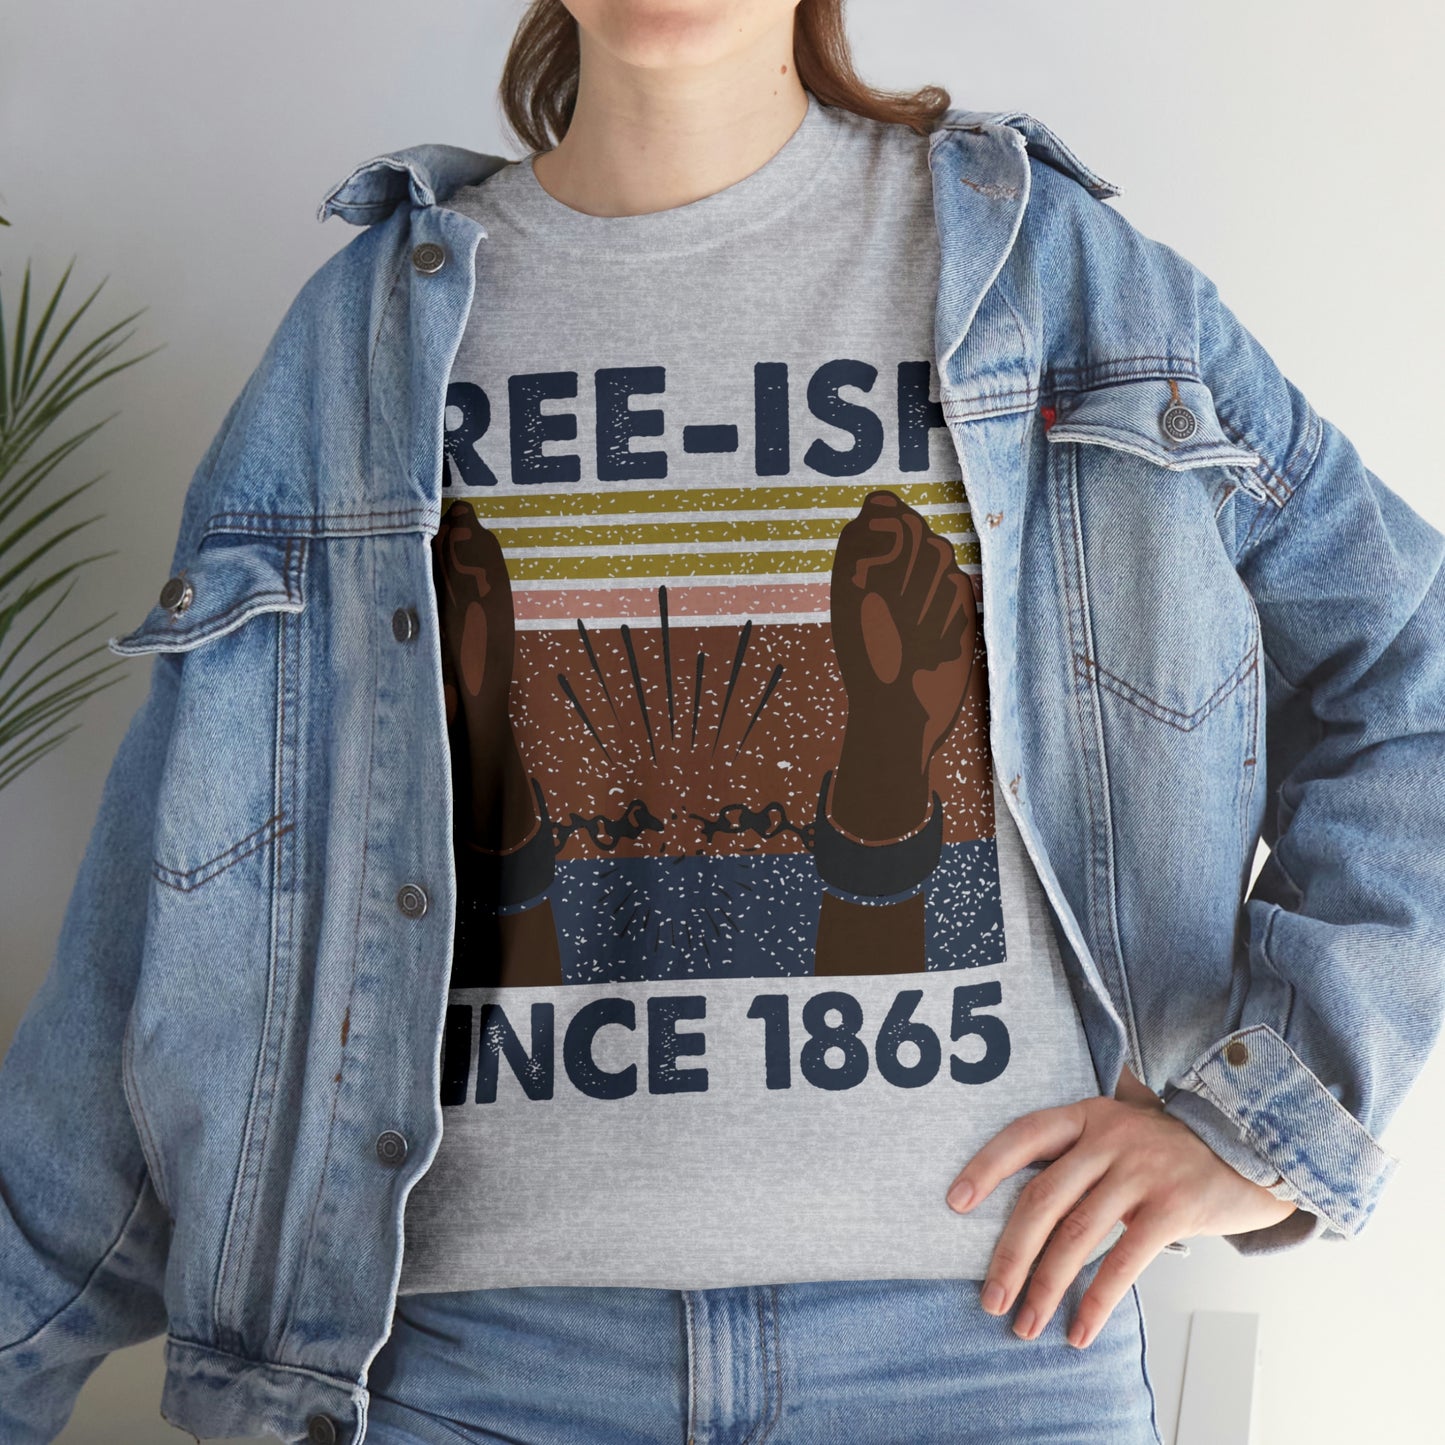 Free-ish since 1865 Shirt Up to 5X